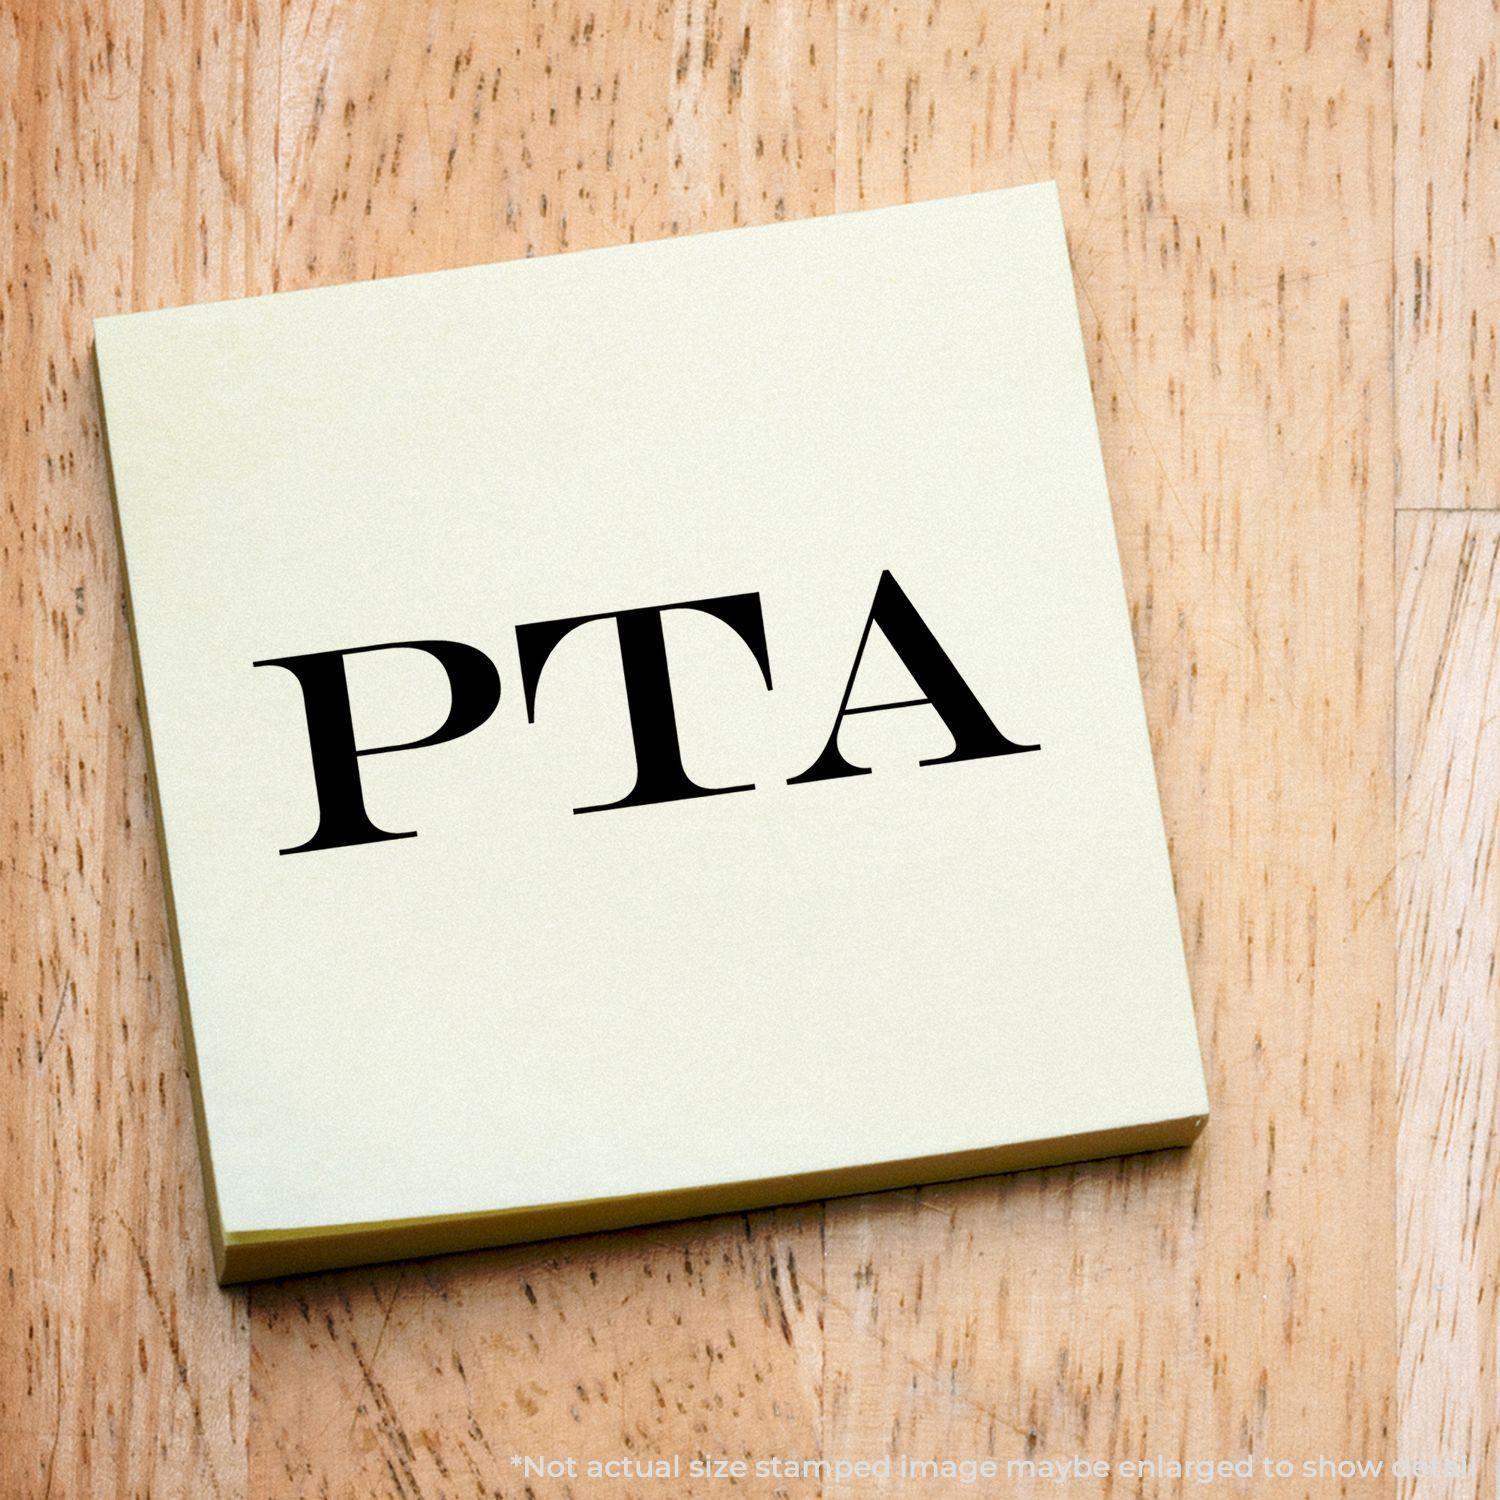 A stock office rubber stamp with a stamped image showing how the text "PTA" is displayed after stamping.